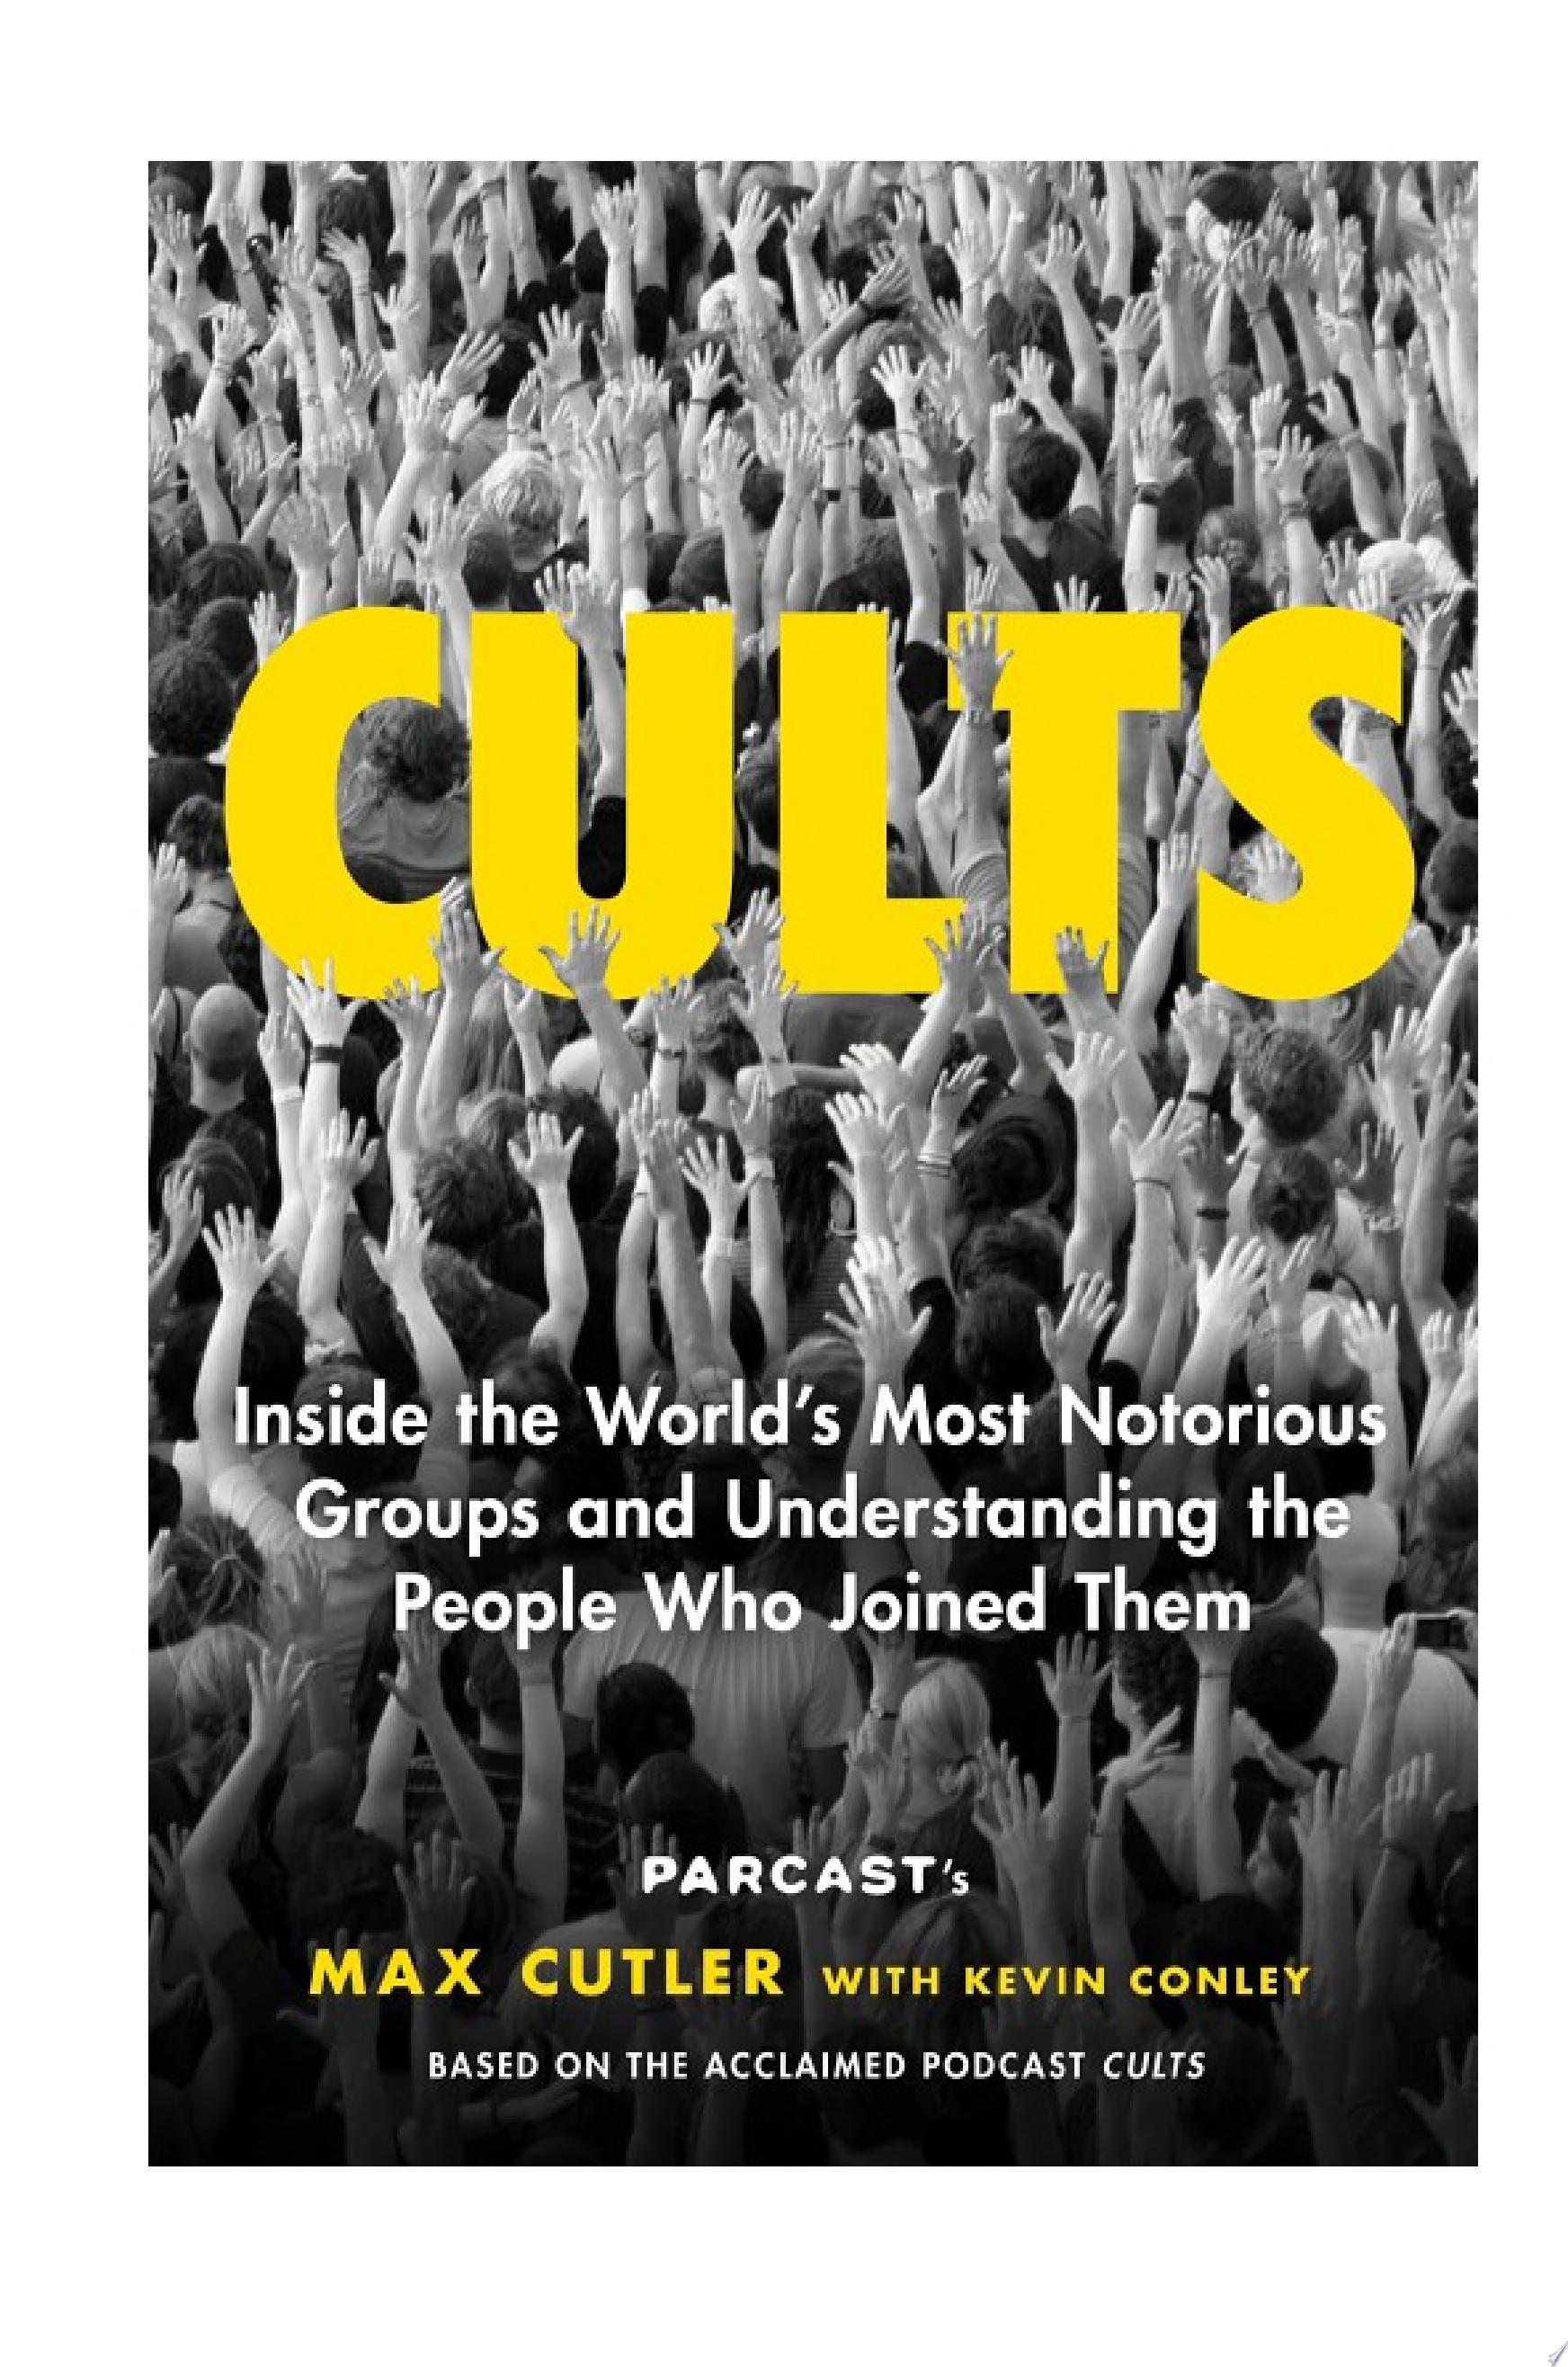 Image for "Cults"